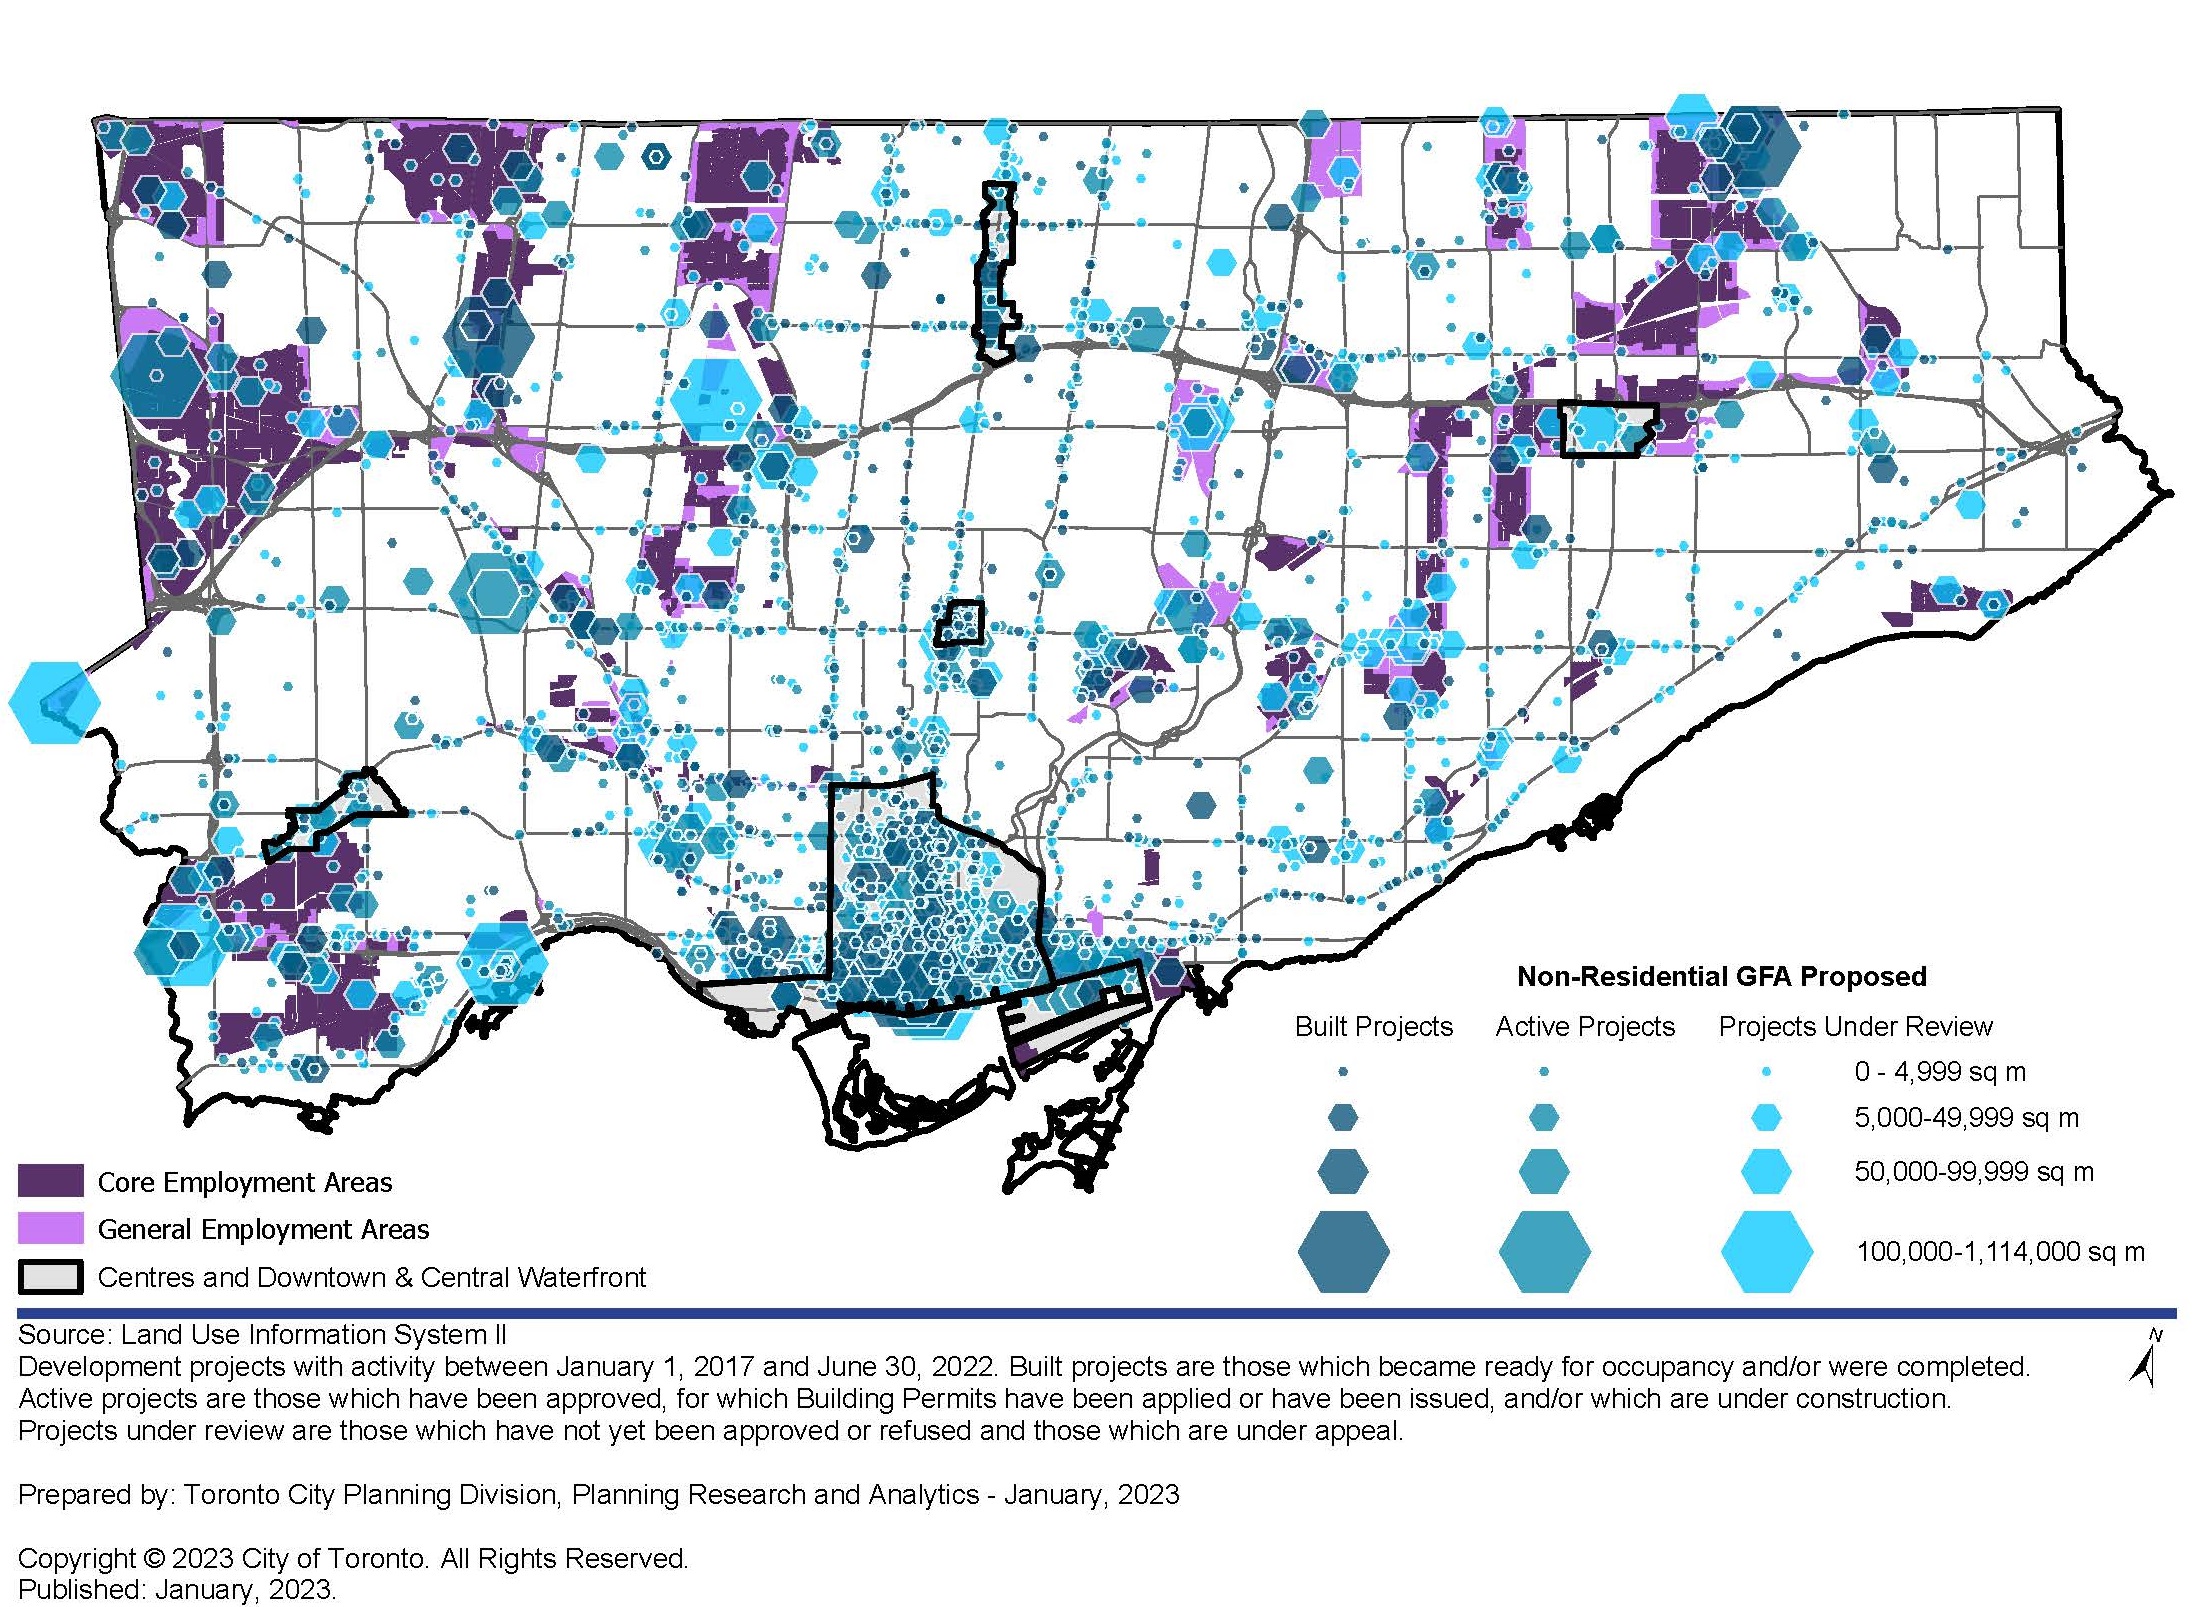 This map shows non-residential projects as graduated hexagons with their size based on the amount of non-residential GFA they propose. For more information, contact Hailey Toft at 416-392-9787 or hailey.toft@toronto.ca.